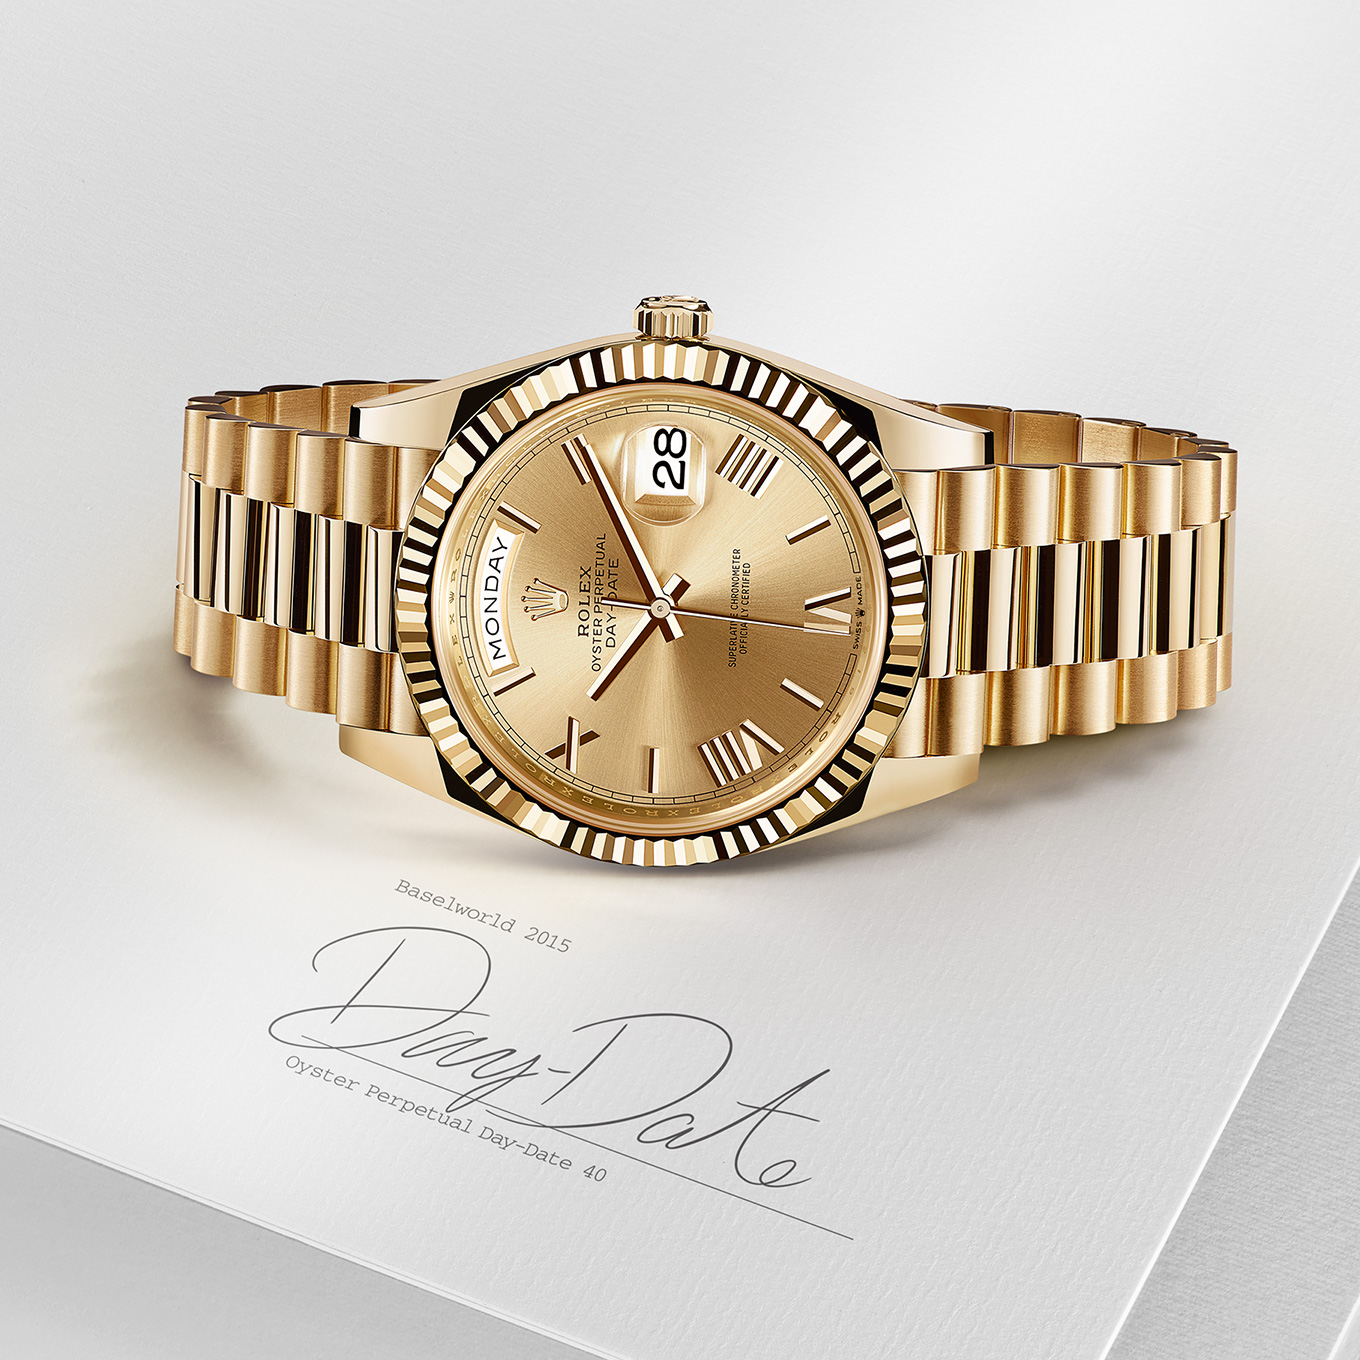 Rolex Lady Oyster Perpetual Champagne/18k gold 26mm - 79173G CPRolex Lady Oyster Perpetual Champagne/18k gold Ø26 mm - 179173